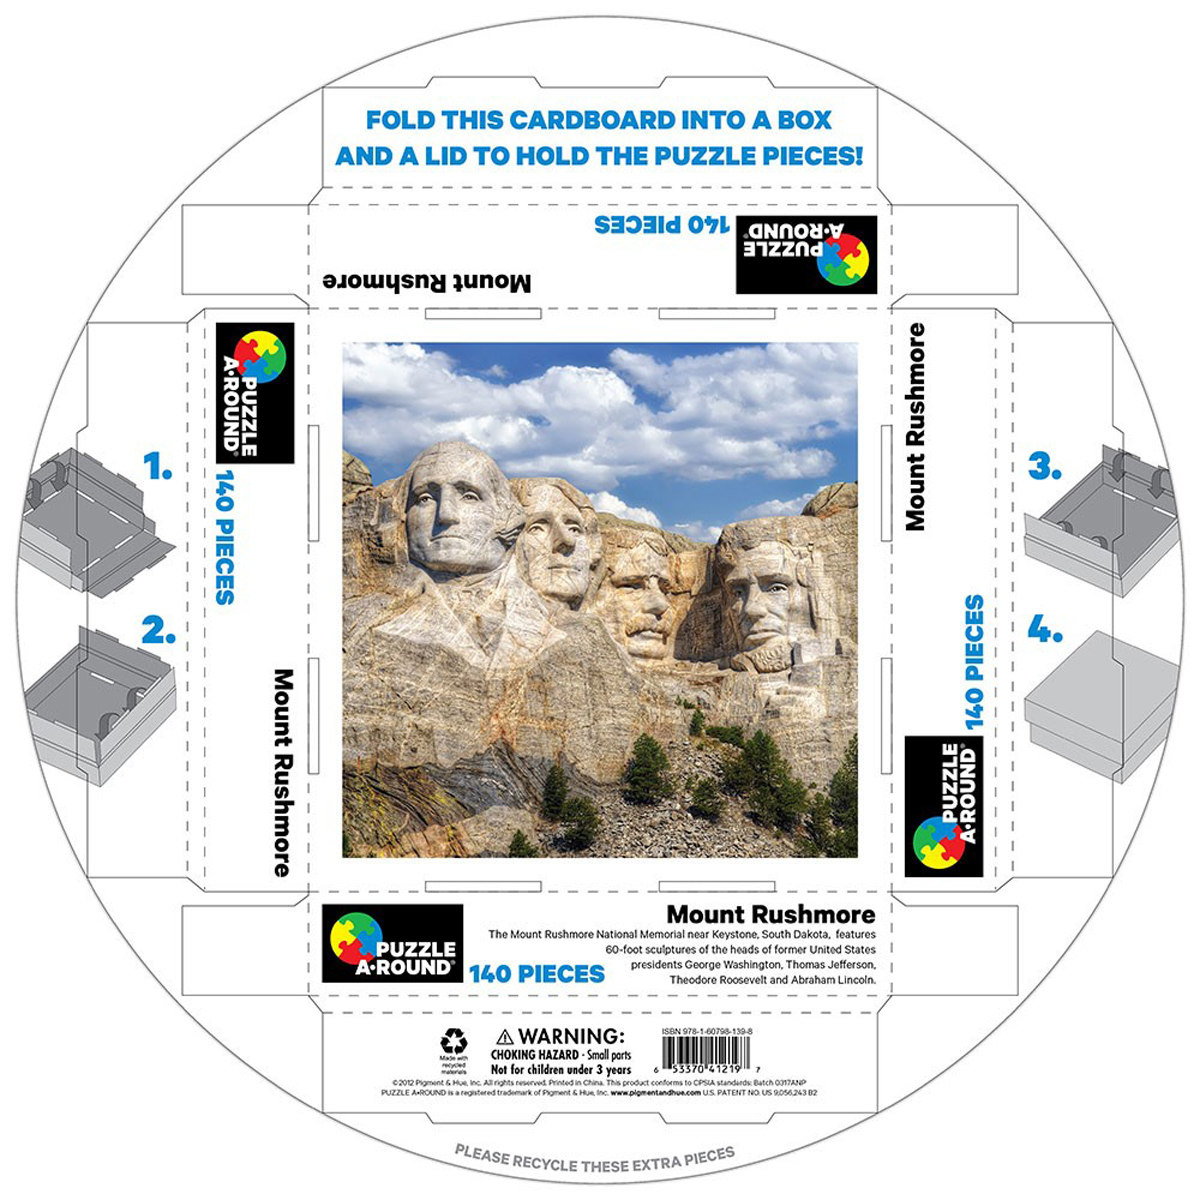 Mount Rushmore Puzzle A-Round